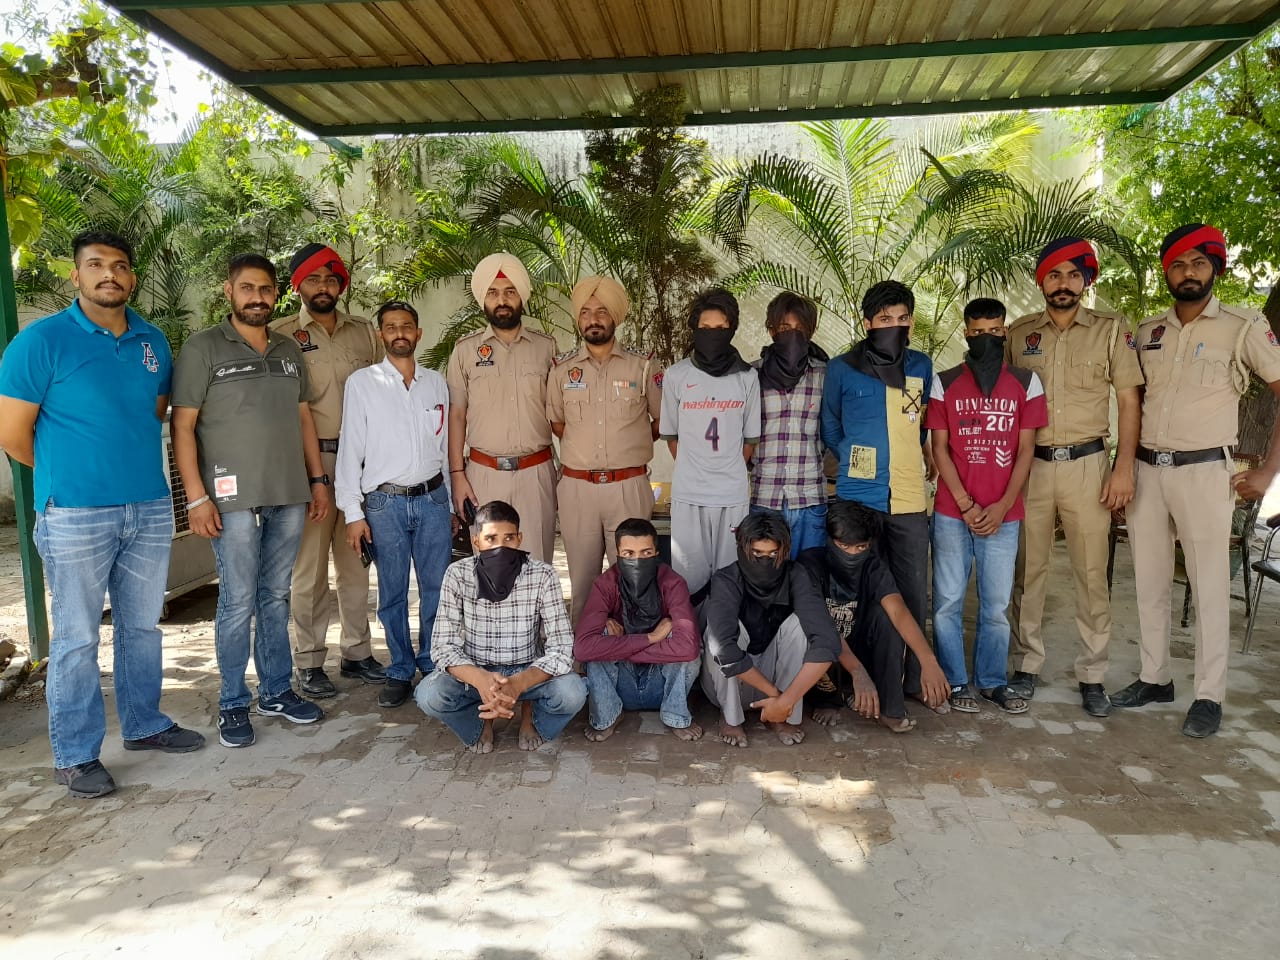 Gang of looters busted, nine nabbed in Ludhiana